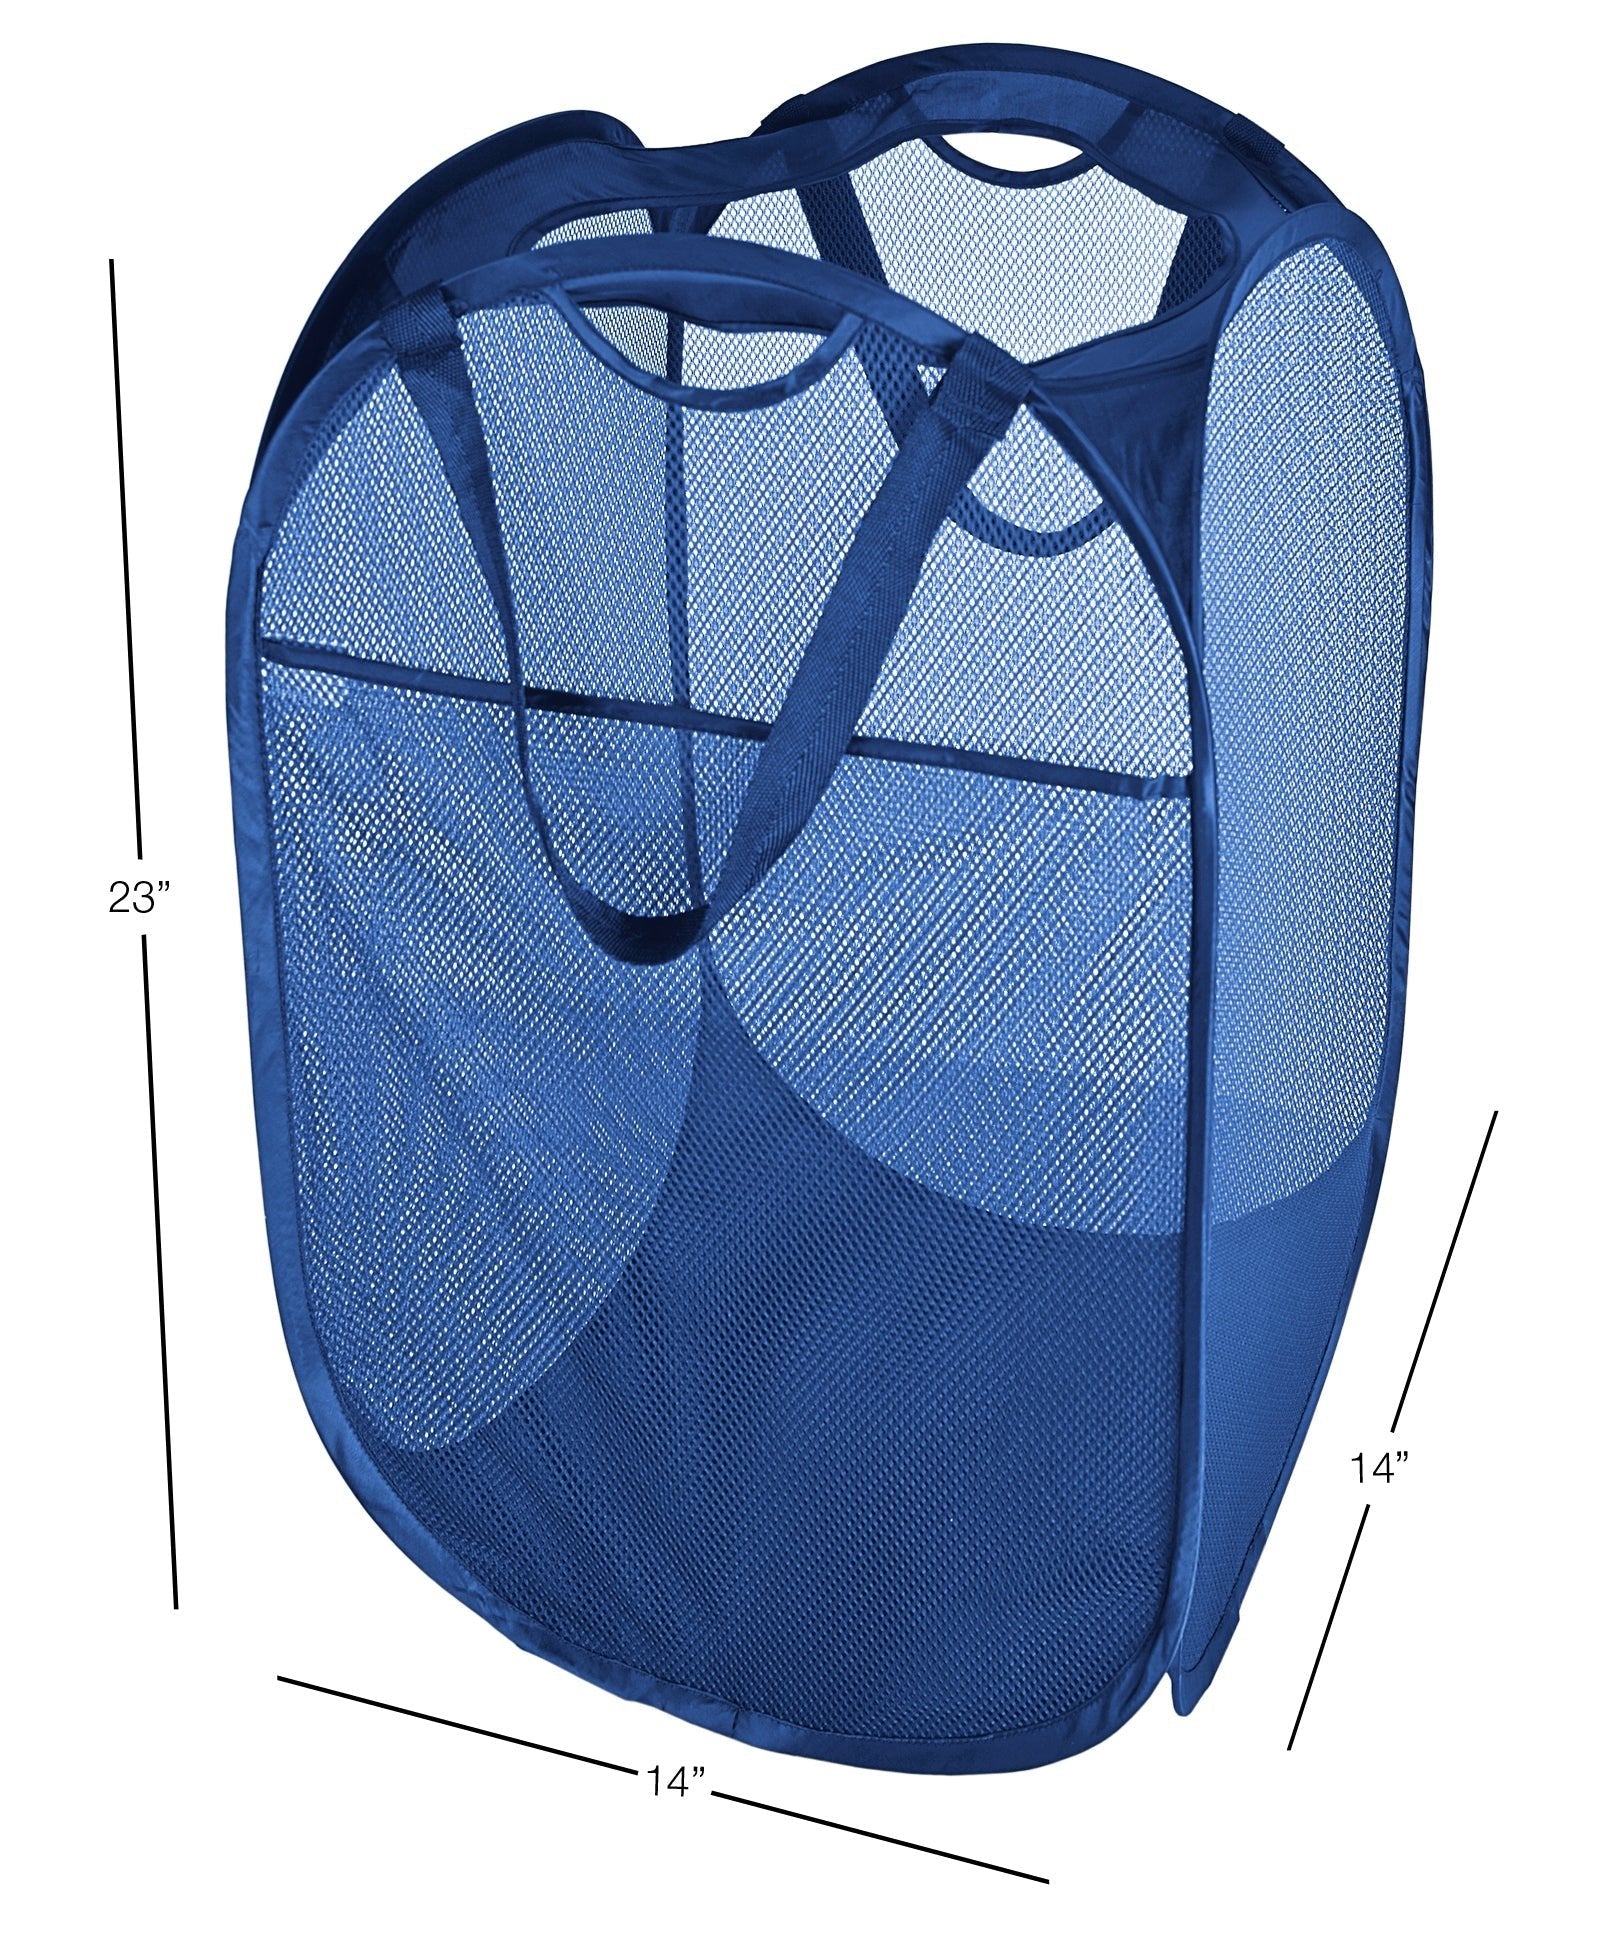 SmartDesign Smart Design Deluxe Mesh Pop Up Square Laundry Basket Hamper  w/Side Pockets & Handles - Durable Fabric Collapsible Design - for Clothes  & Laundry - Home - (Holds 2 Loads) (17 x 14 Inch) [Blue]